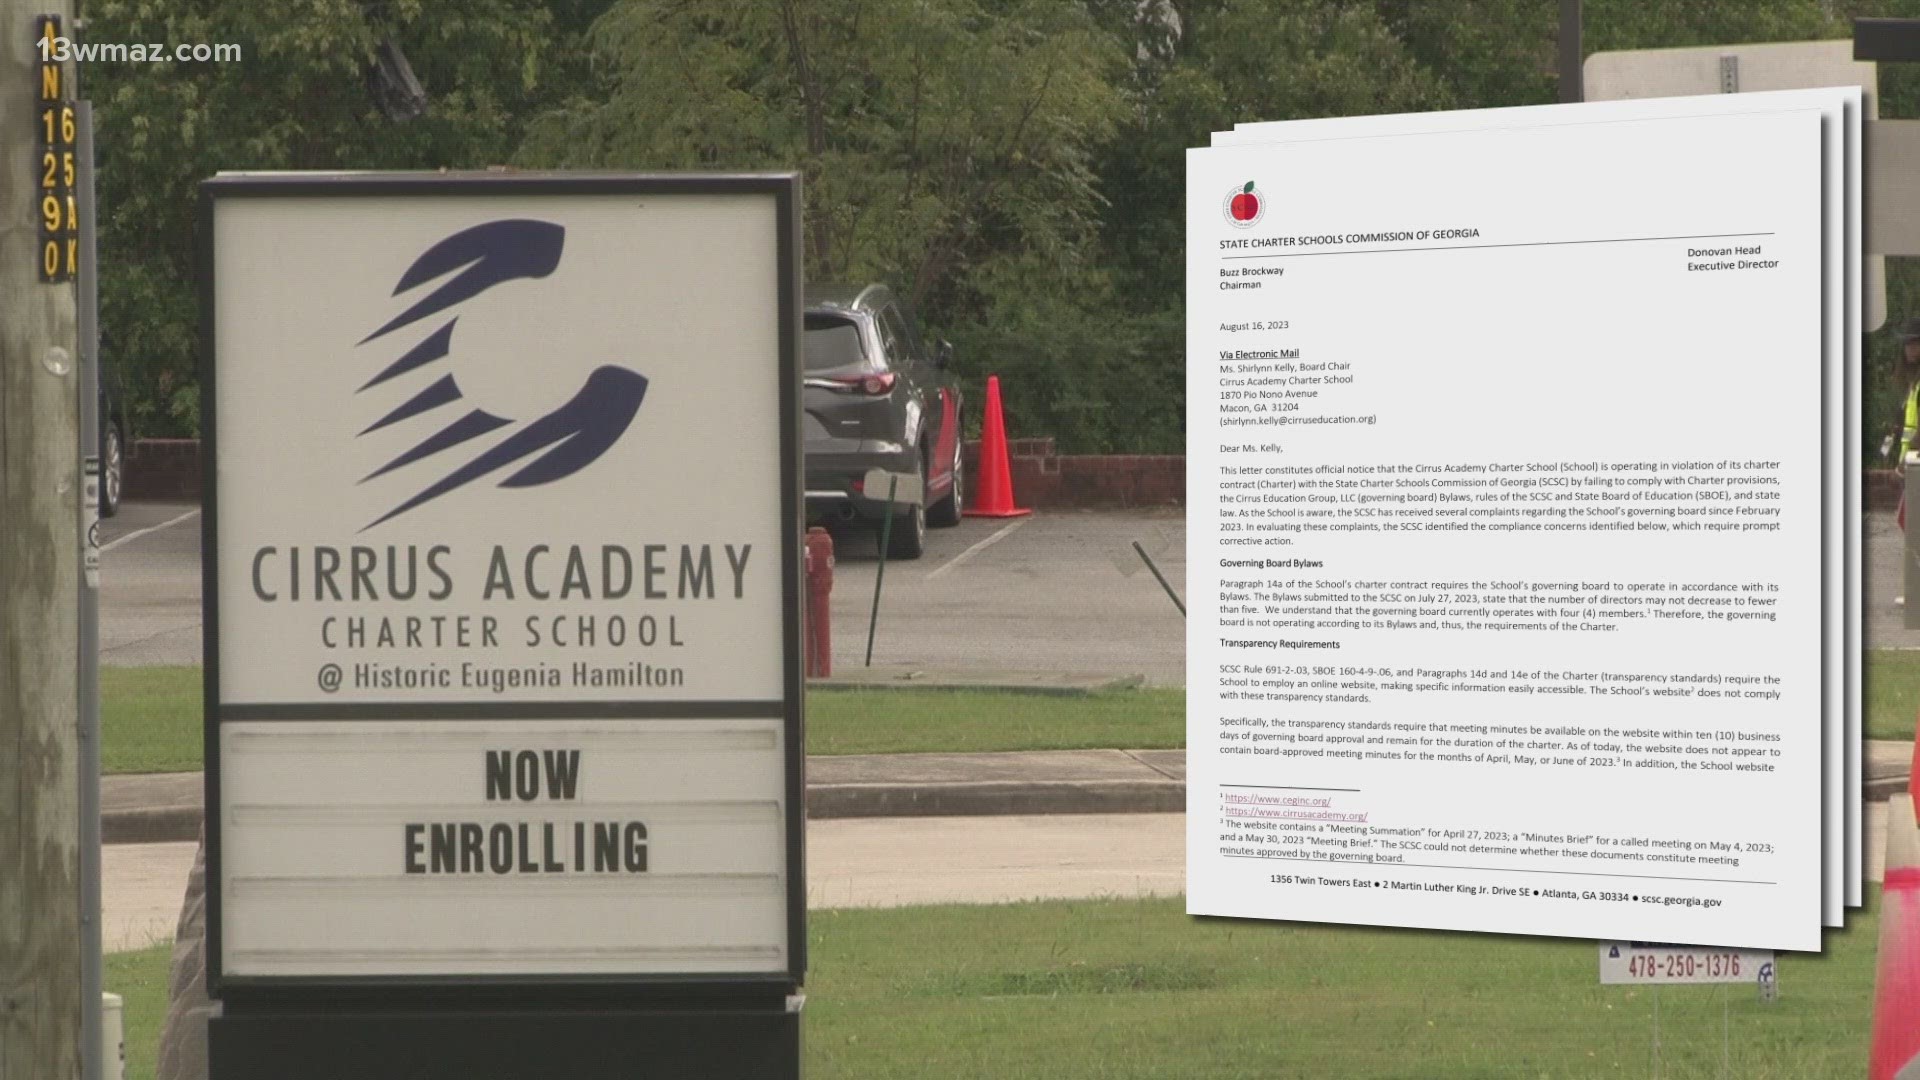 The state charter schools commission wrote a letter to the school's board chair saying they found compliance violations.